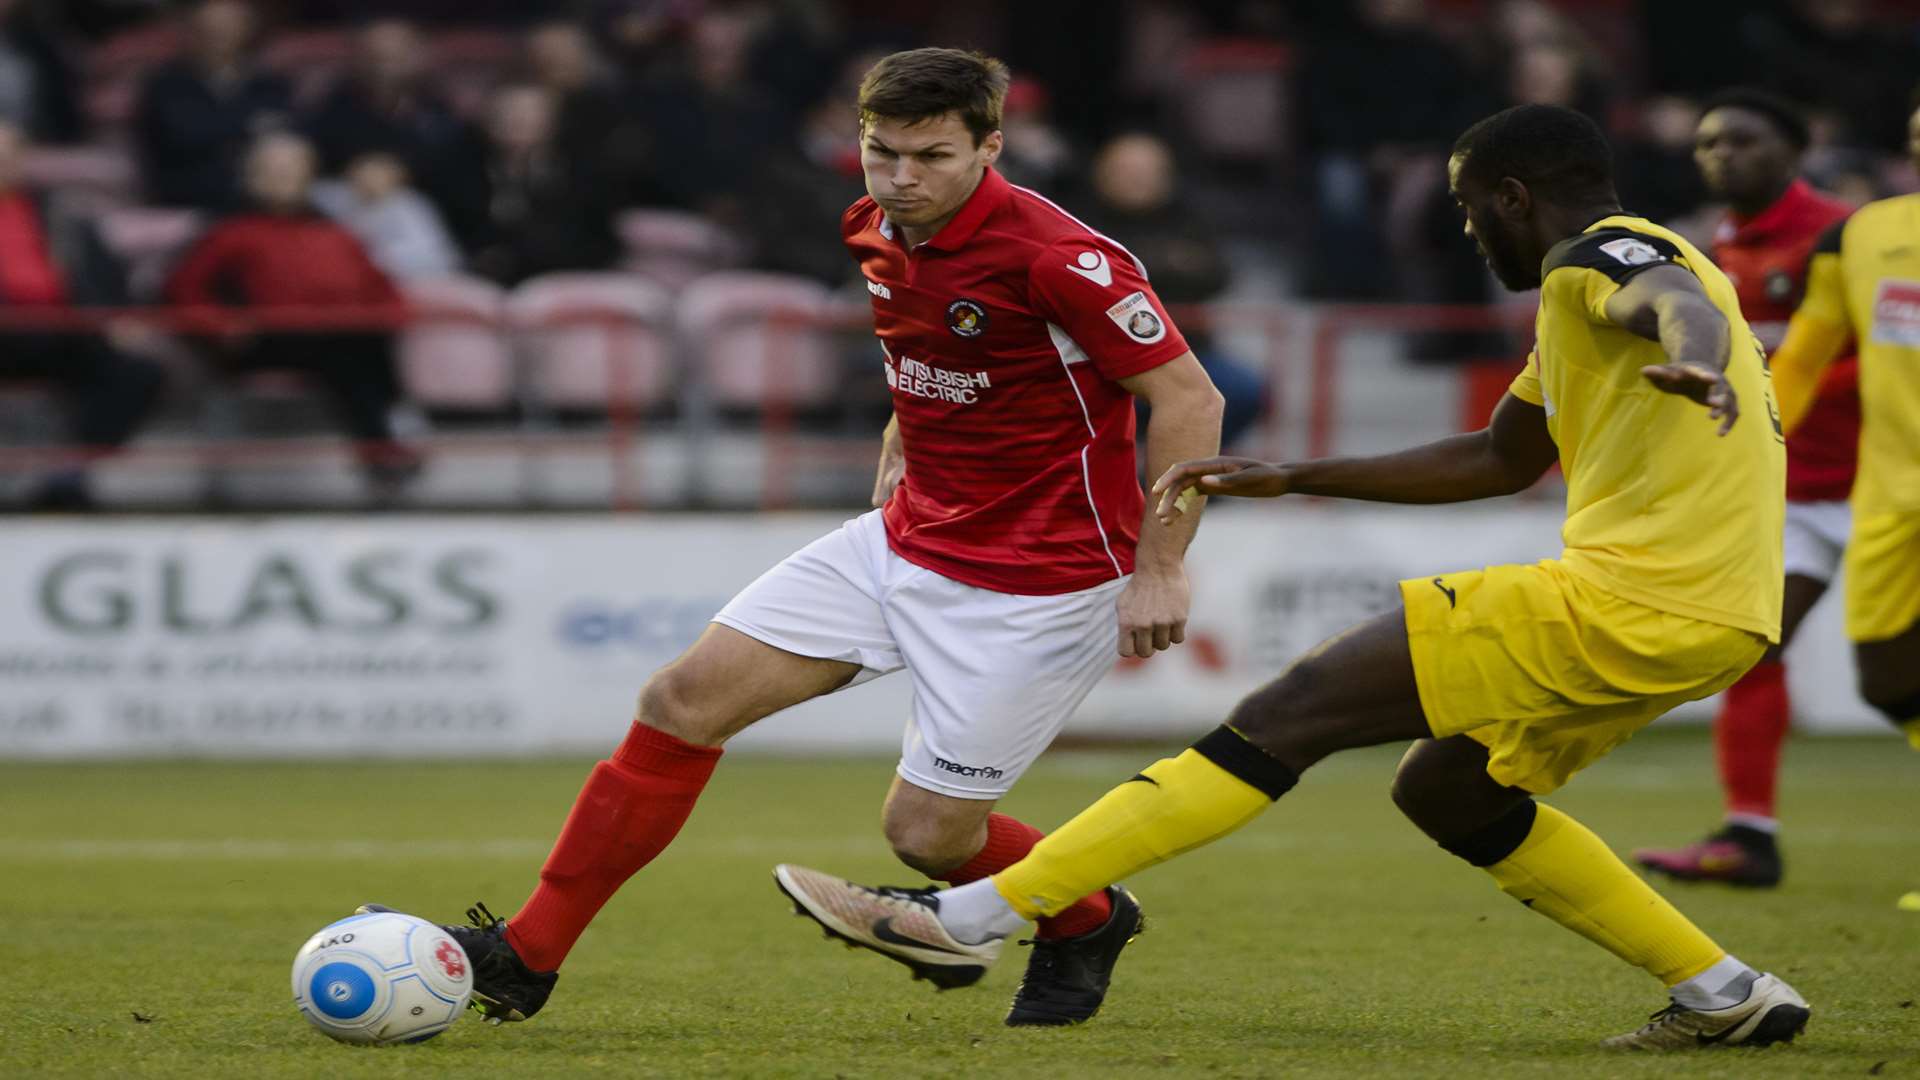 Charlie Sheringham on the ball for Ebbsfleet Picture: Andy Payton